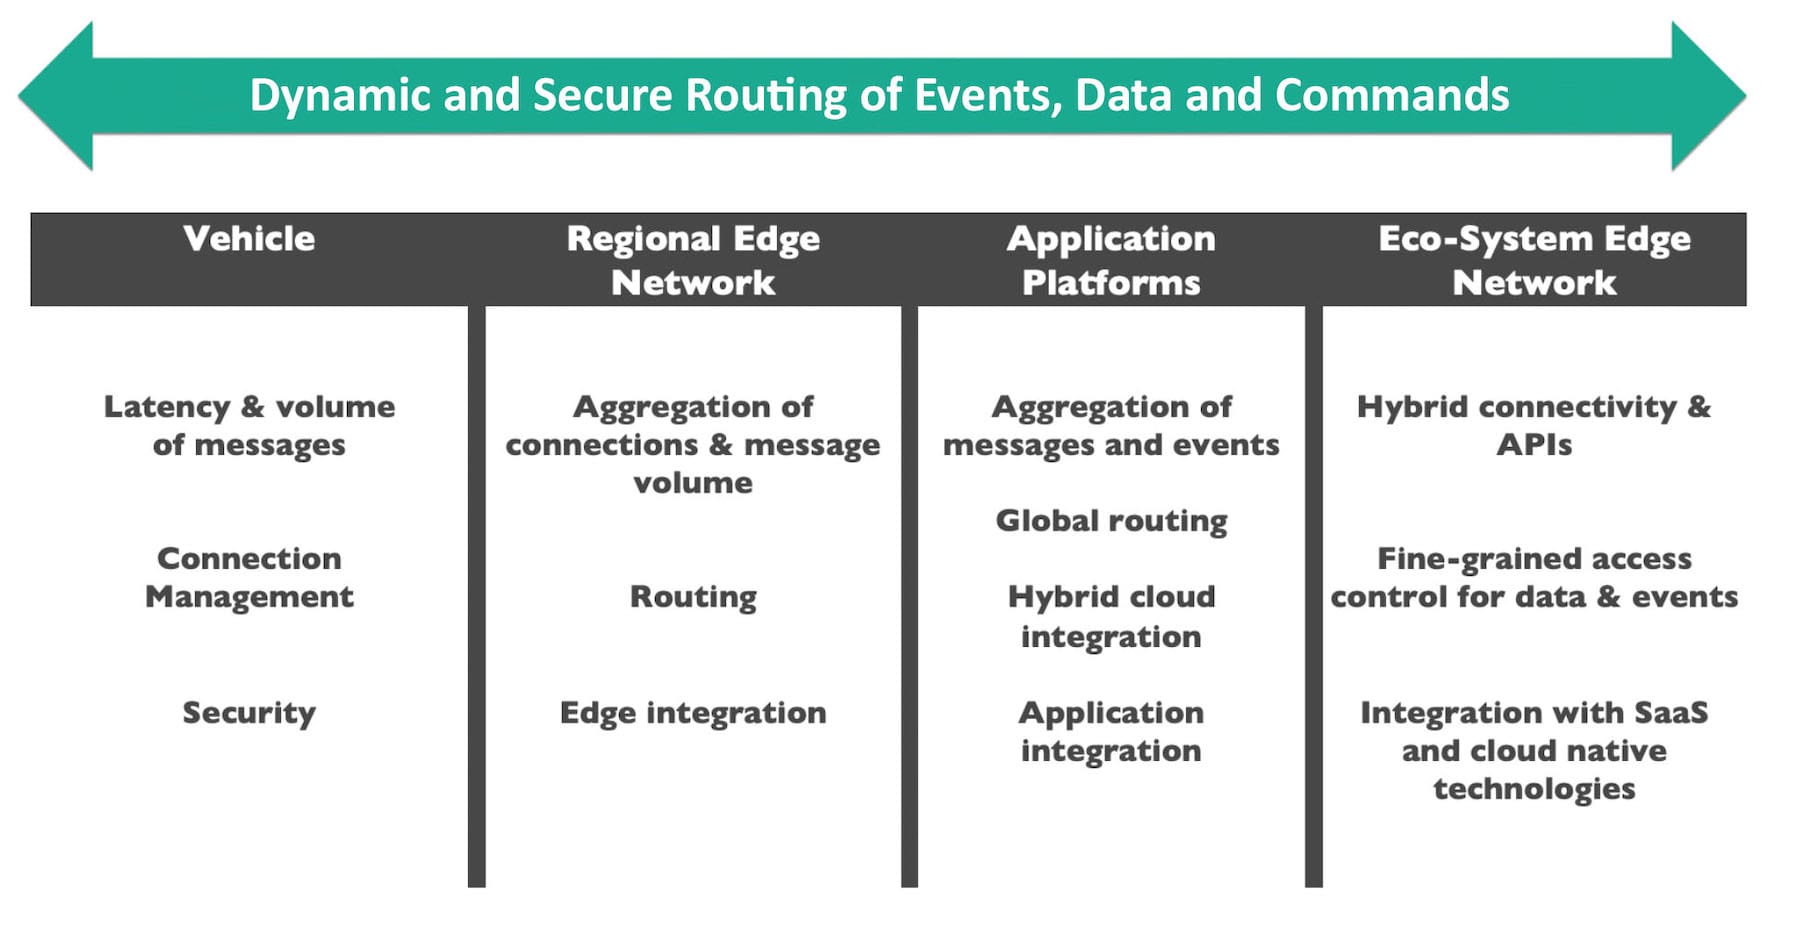 A diagram showing the sequence of events for a connected vehicle initiative: Vehicle, Regional Edge Network, Application Platforms, Eco-System Edge Network